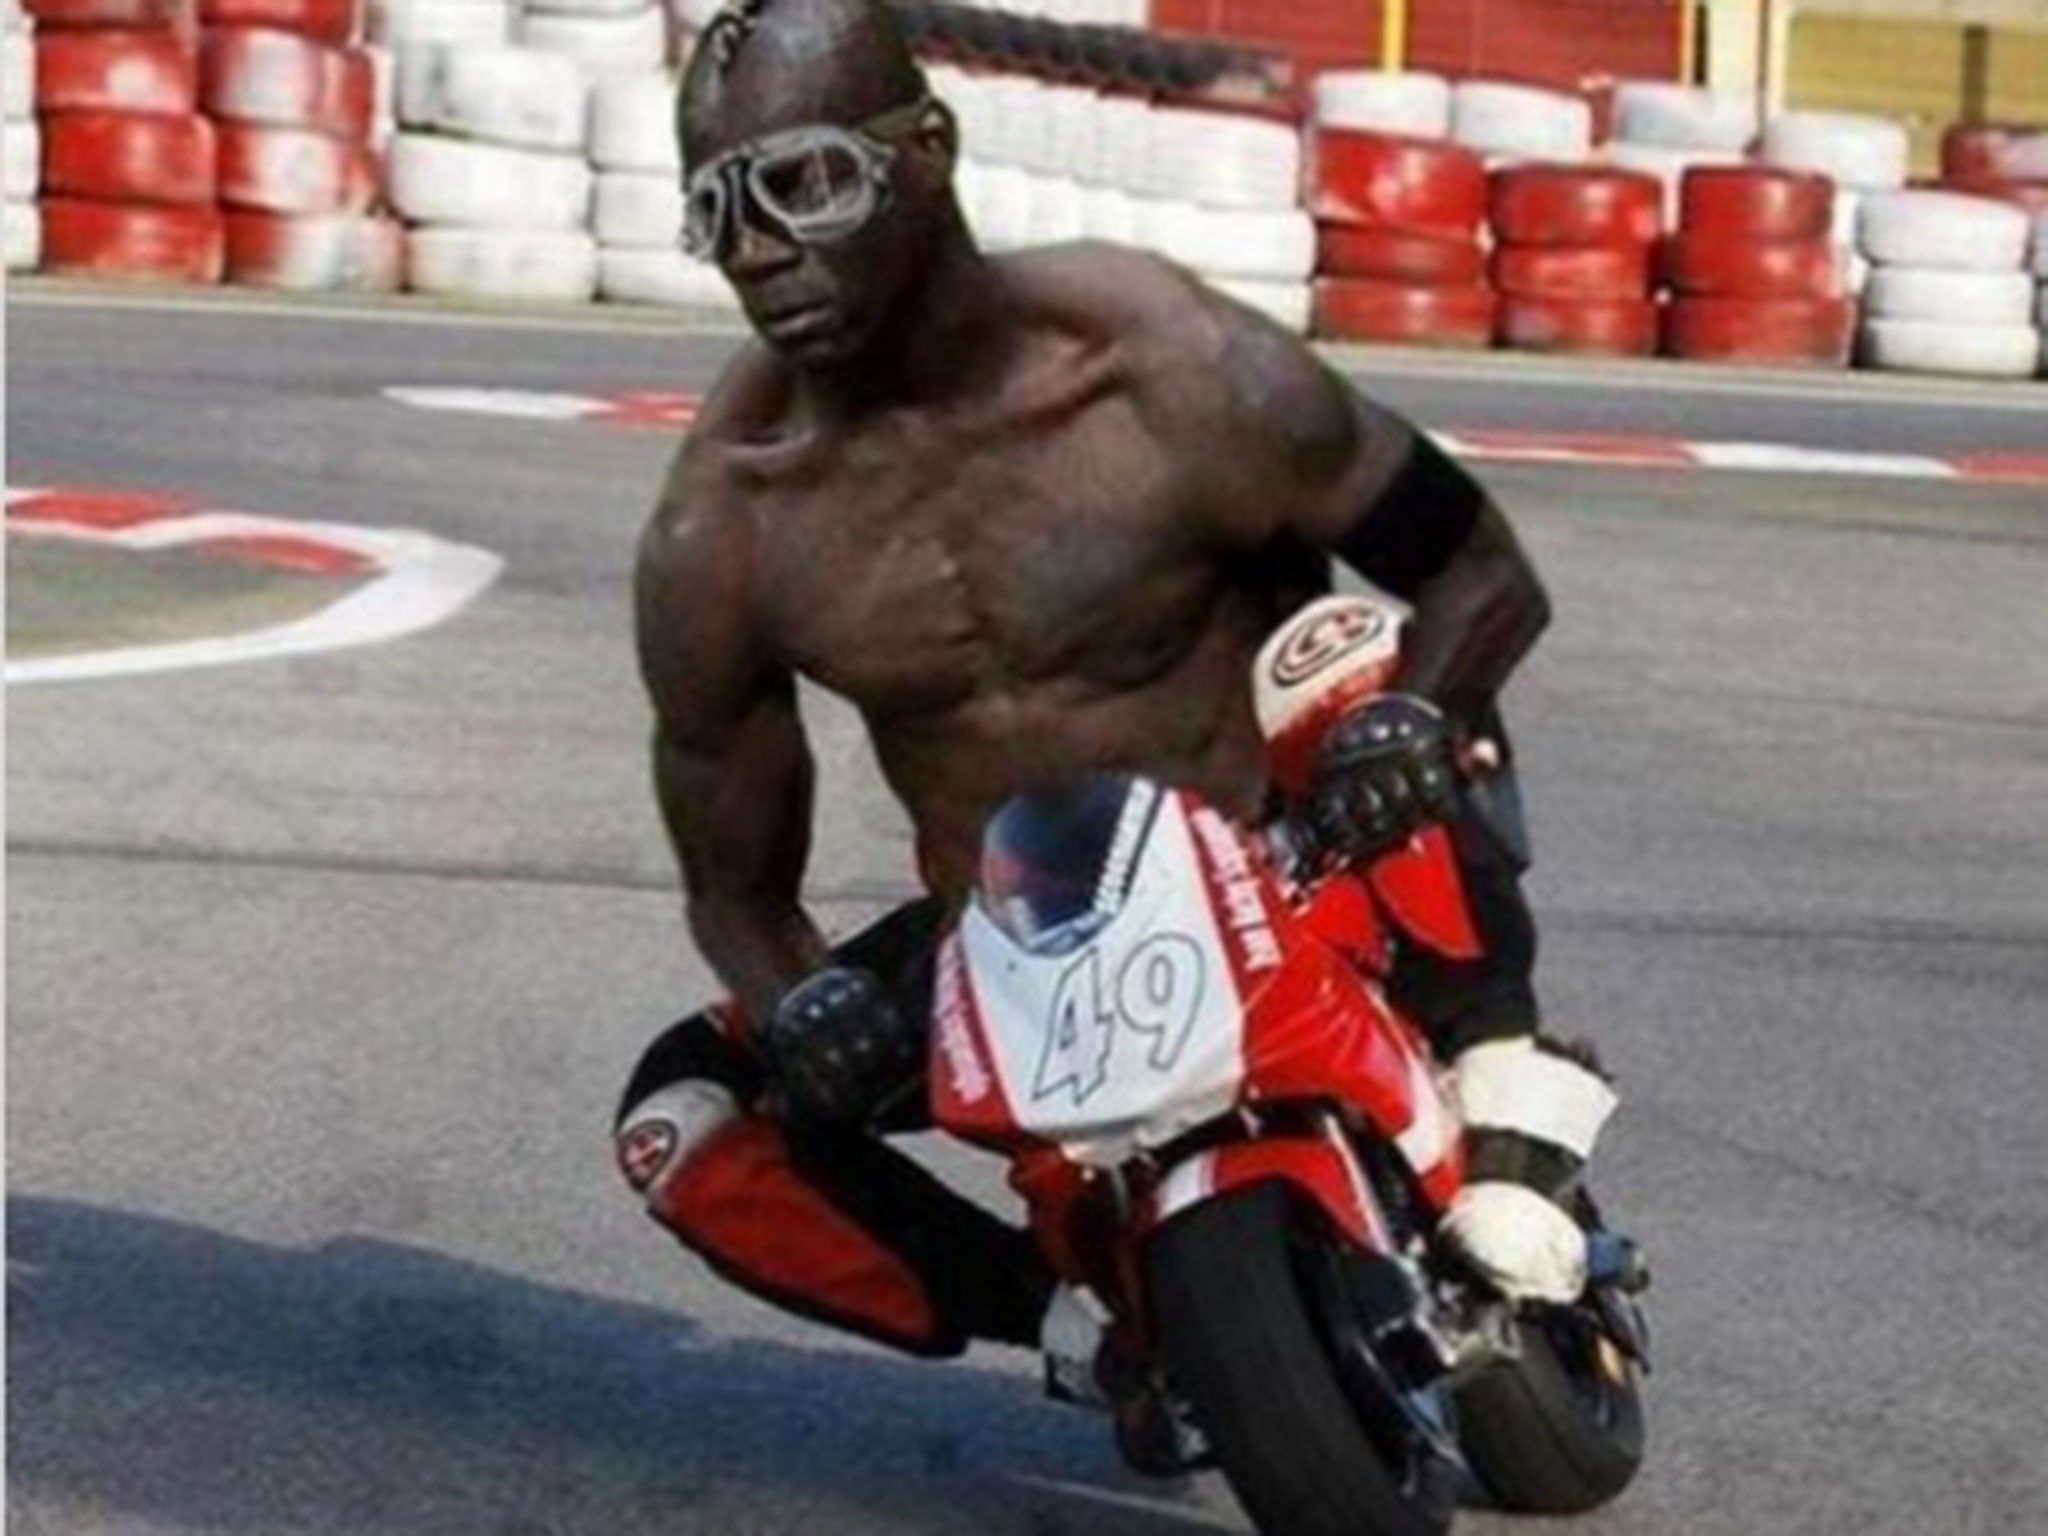 Is this how Mario Balotelli will cruise into Liverpool?